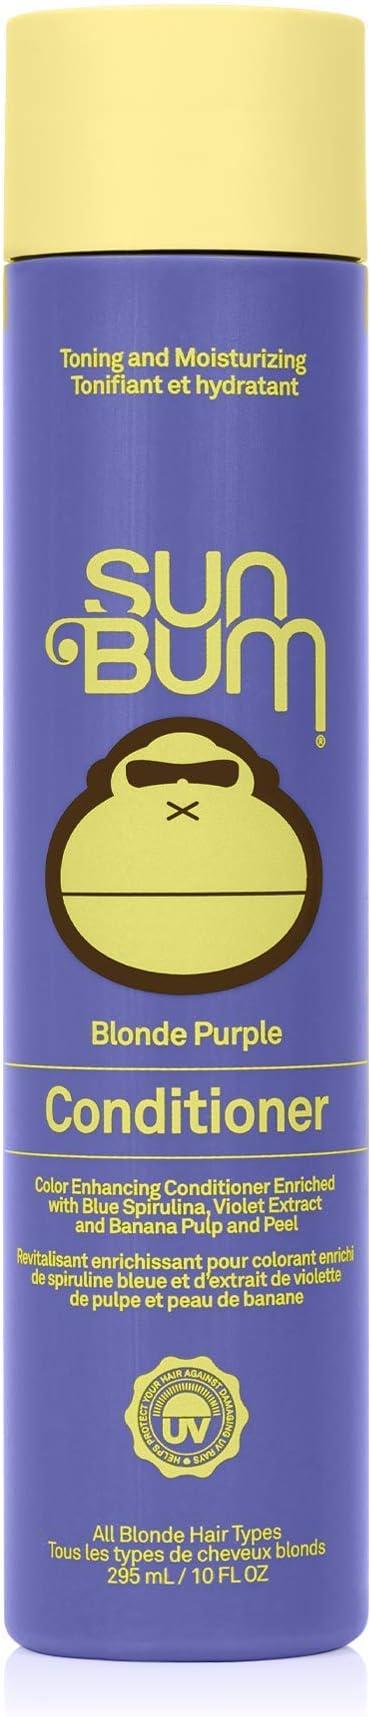 sun bum blonde purple conditioner uv-protecting and cruelty free color enhancing for blondes  sun bum